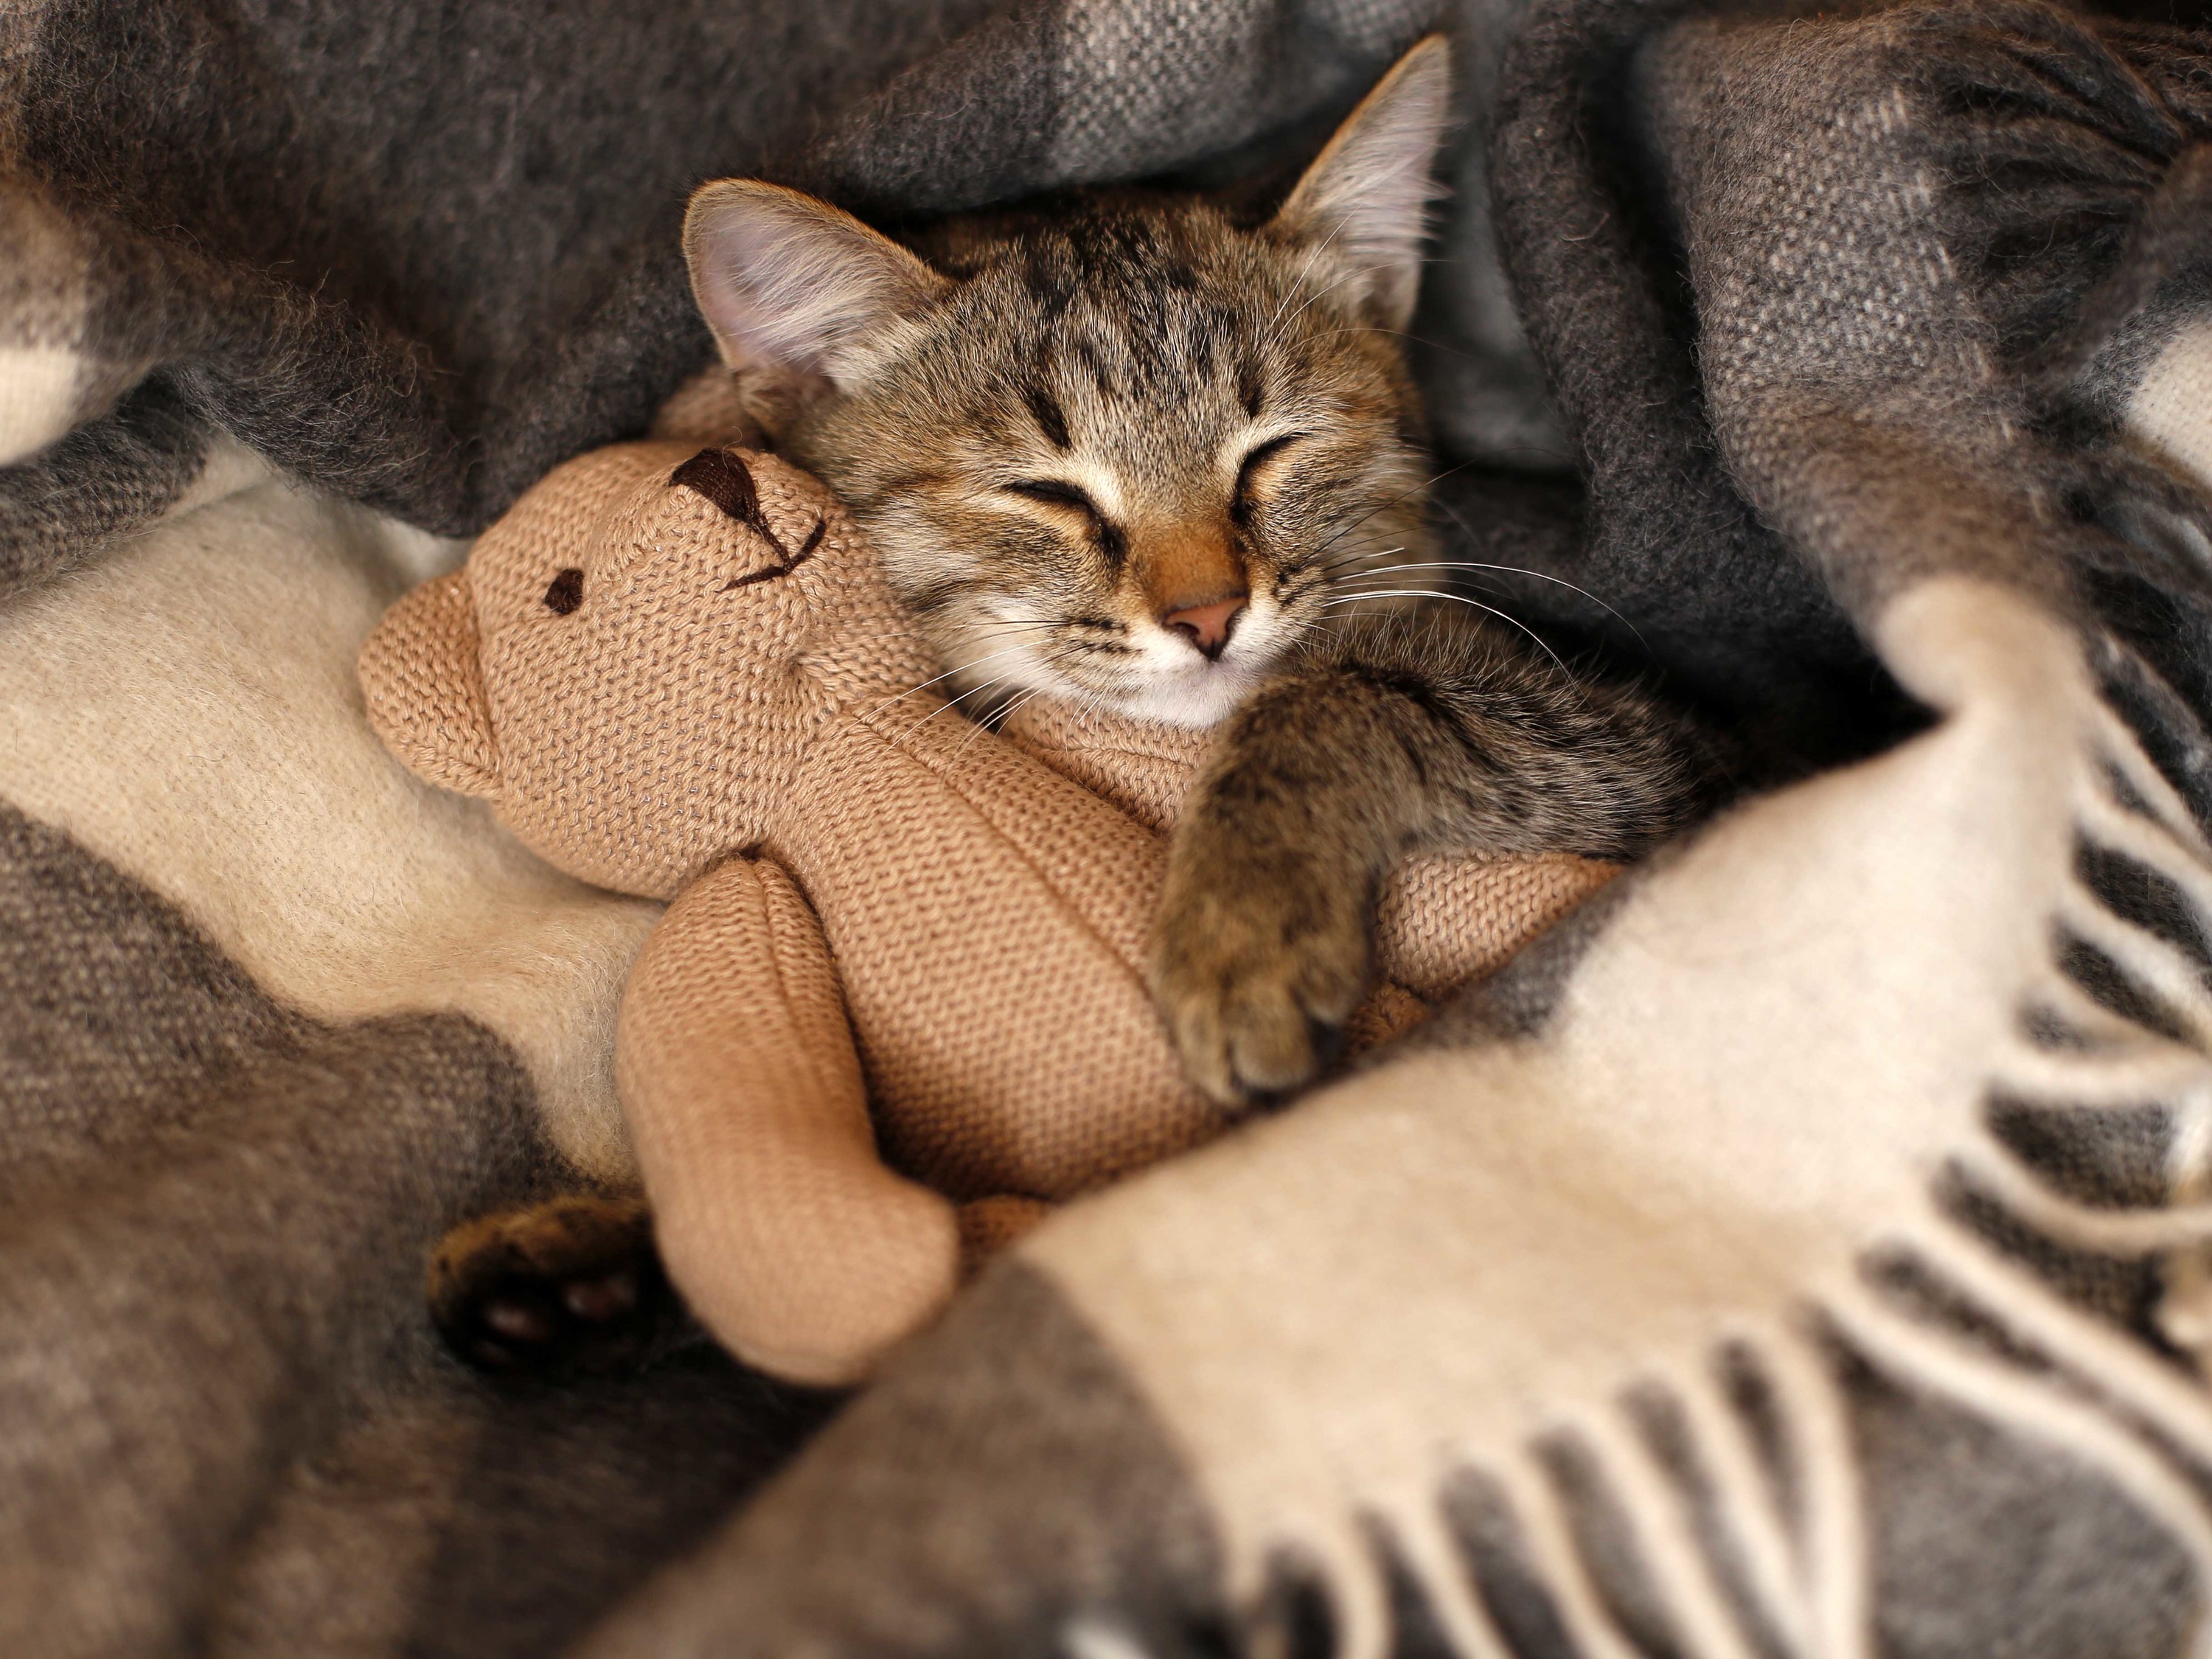 A cute cat holding a teddy bear and resting in a brown and skin blanket 